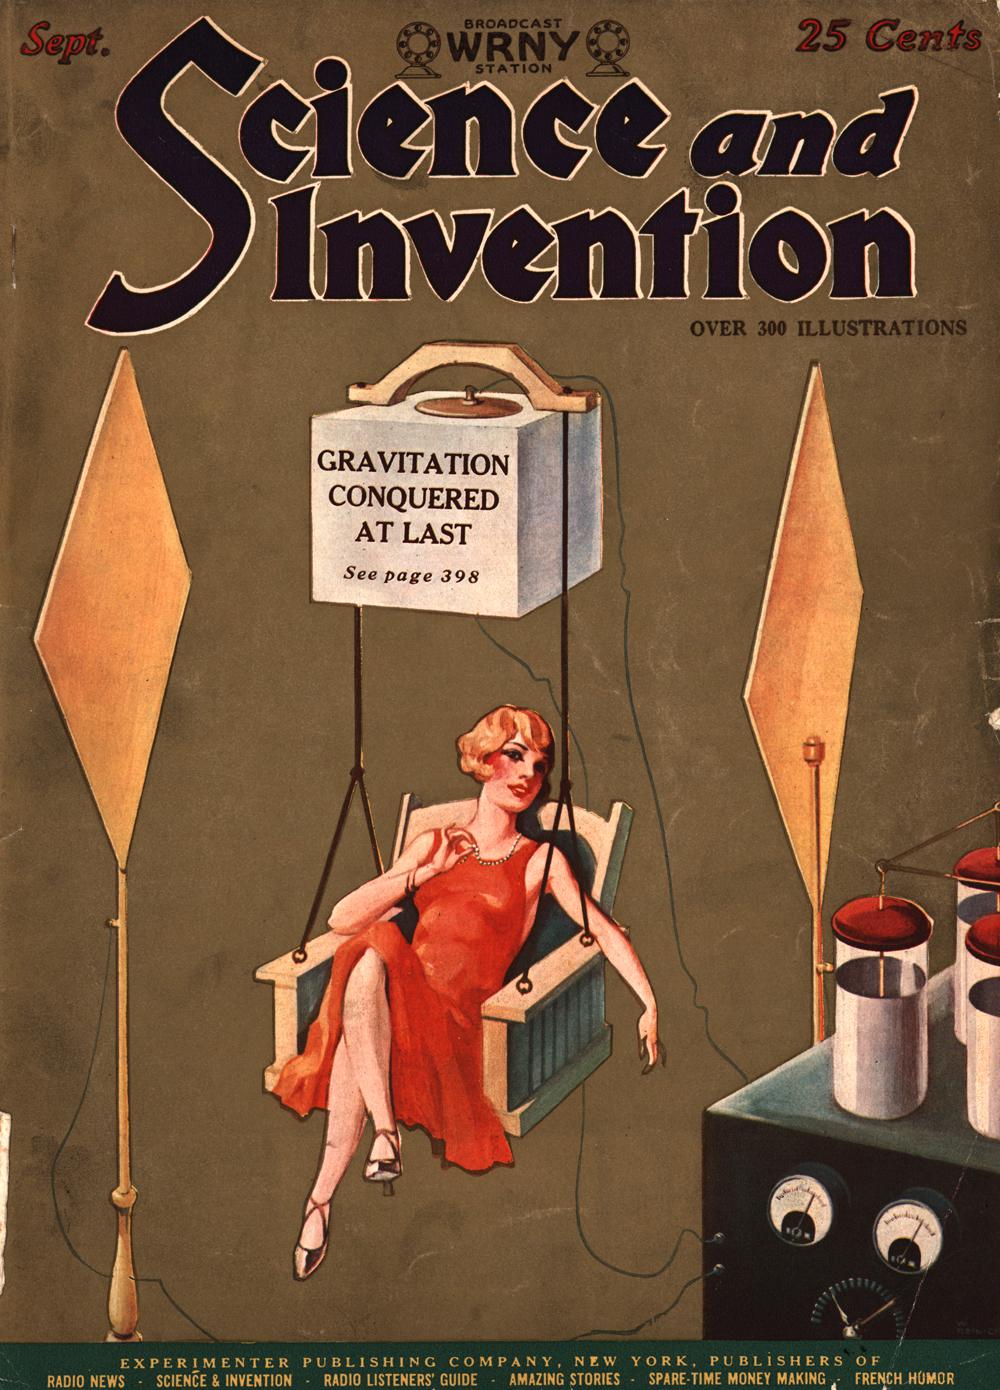 1927 - Science and invention - Vol. 15, No. 5